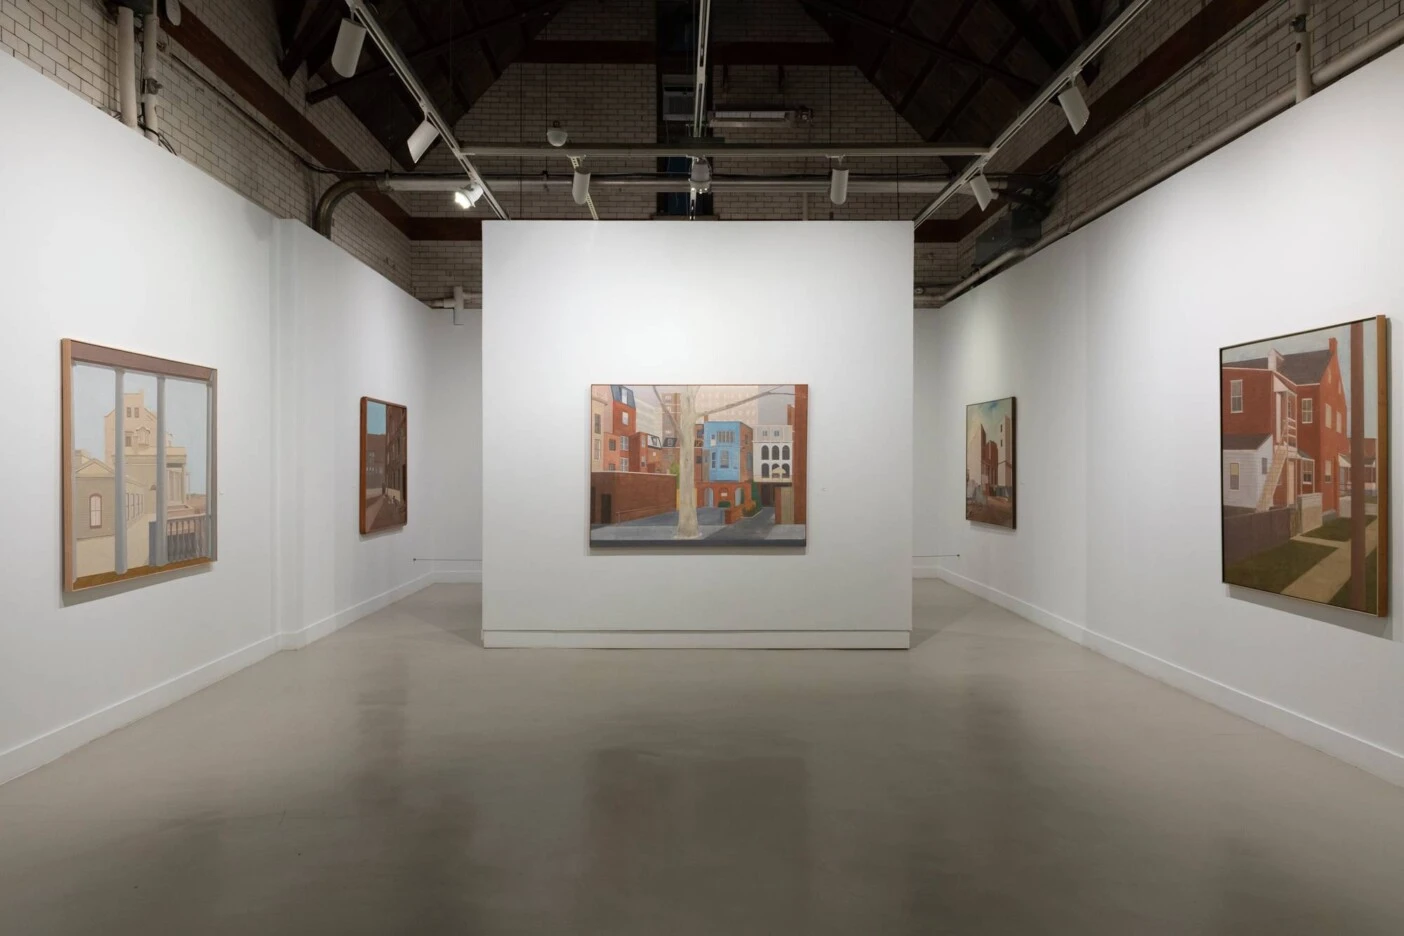 An art gallery displaying painted artworks of different buildings